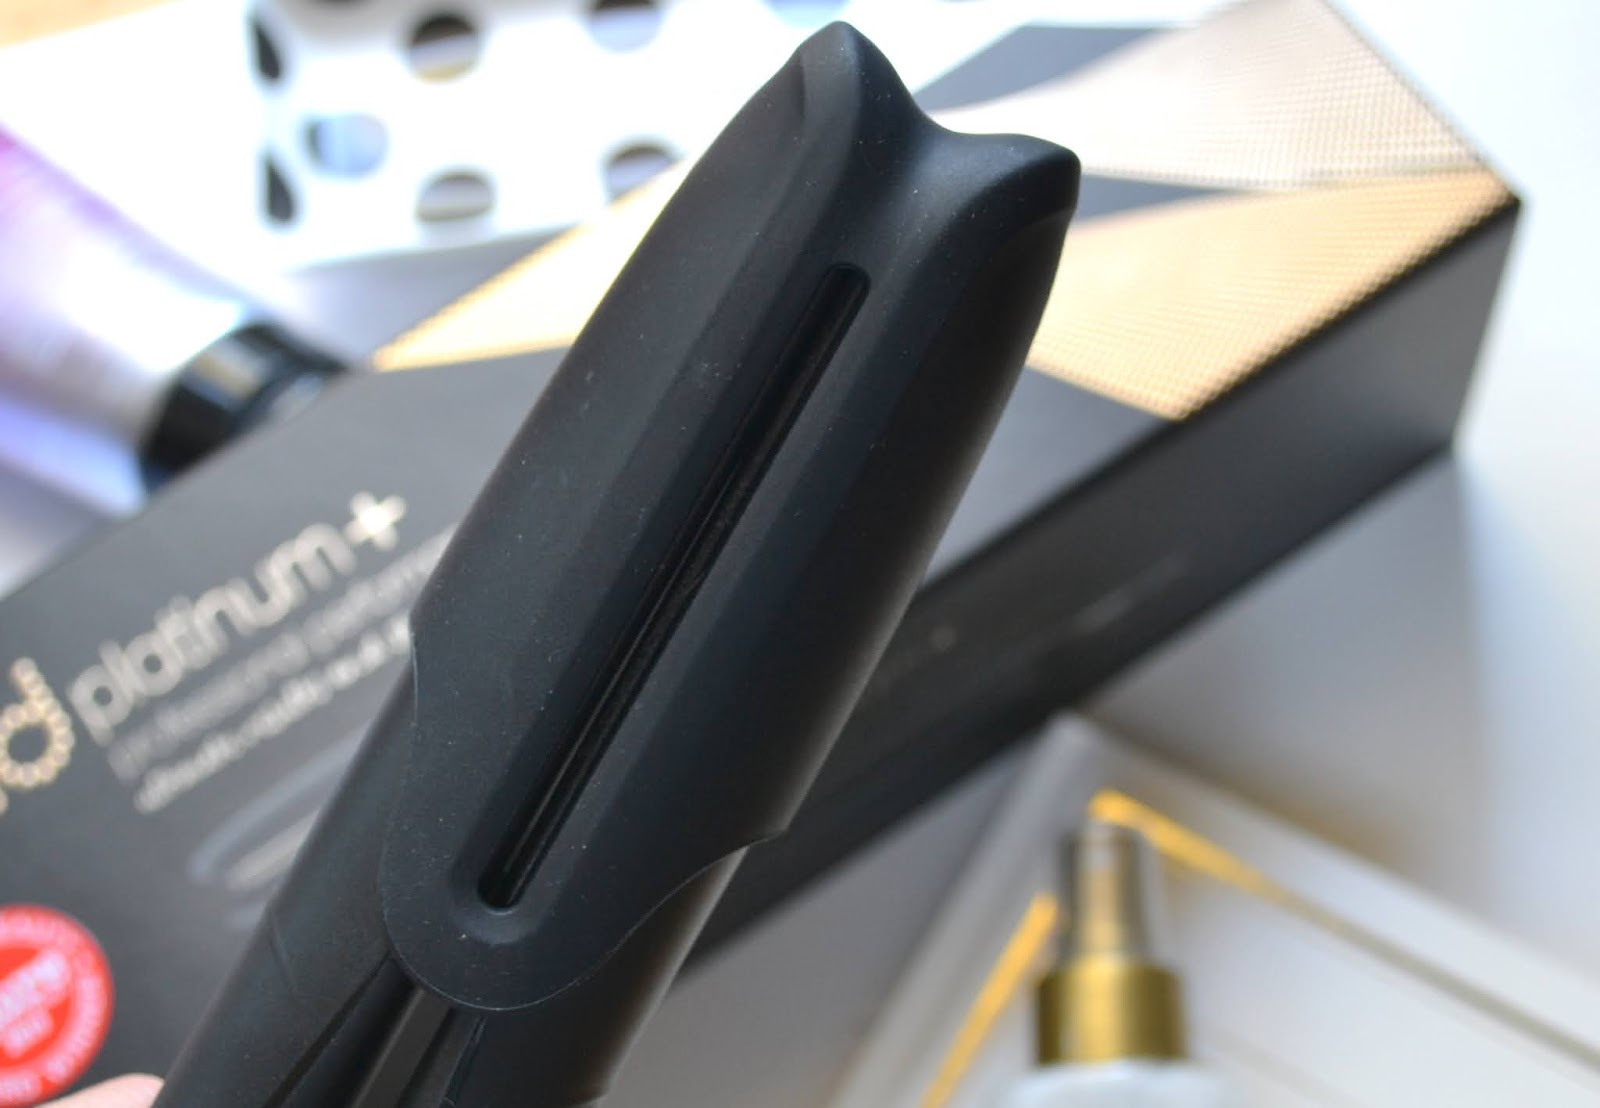 GHD Platinum Plus review: Is the styler worth the hype? - mamabella